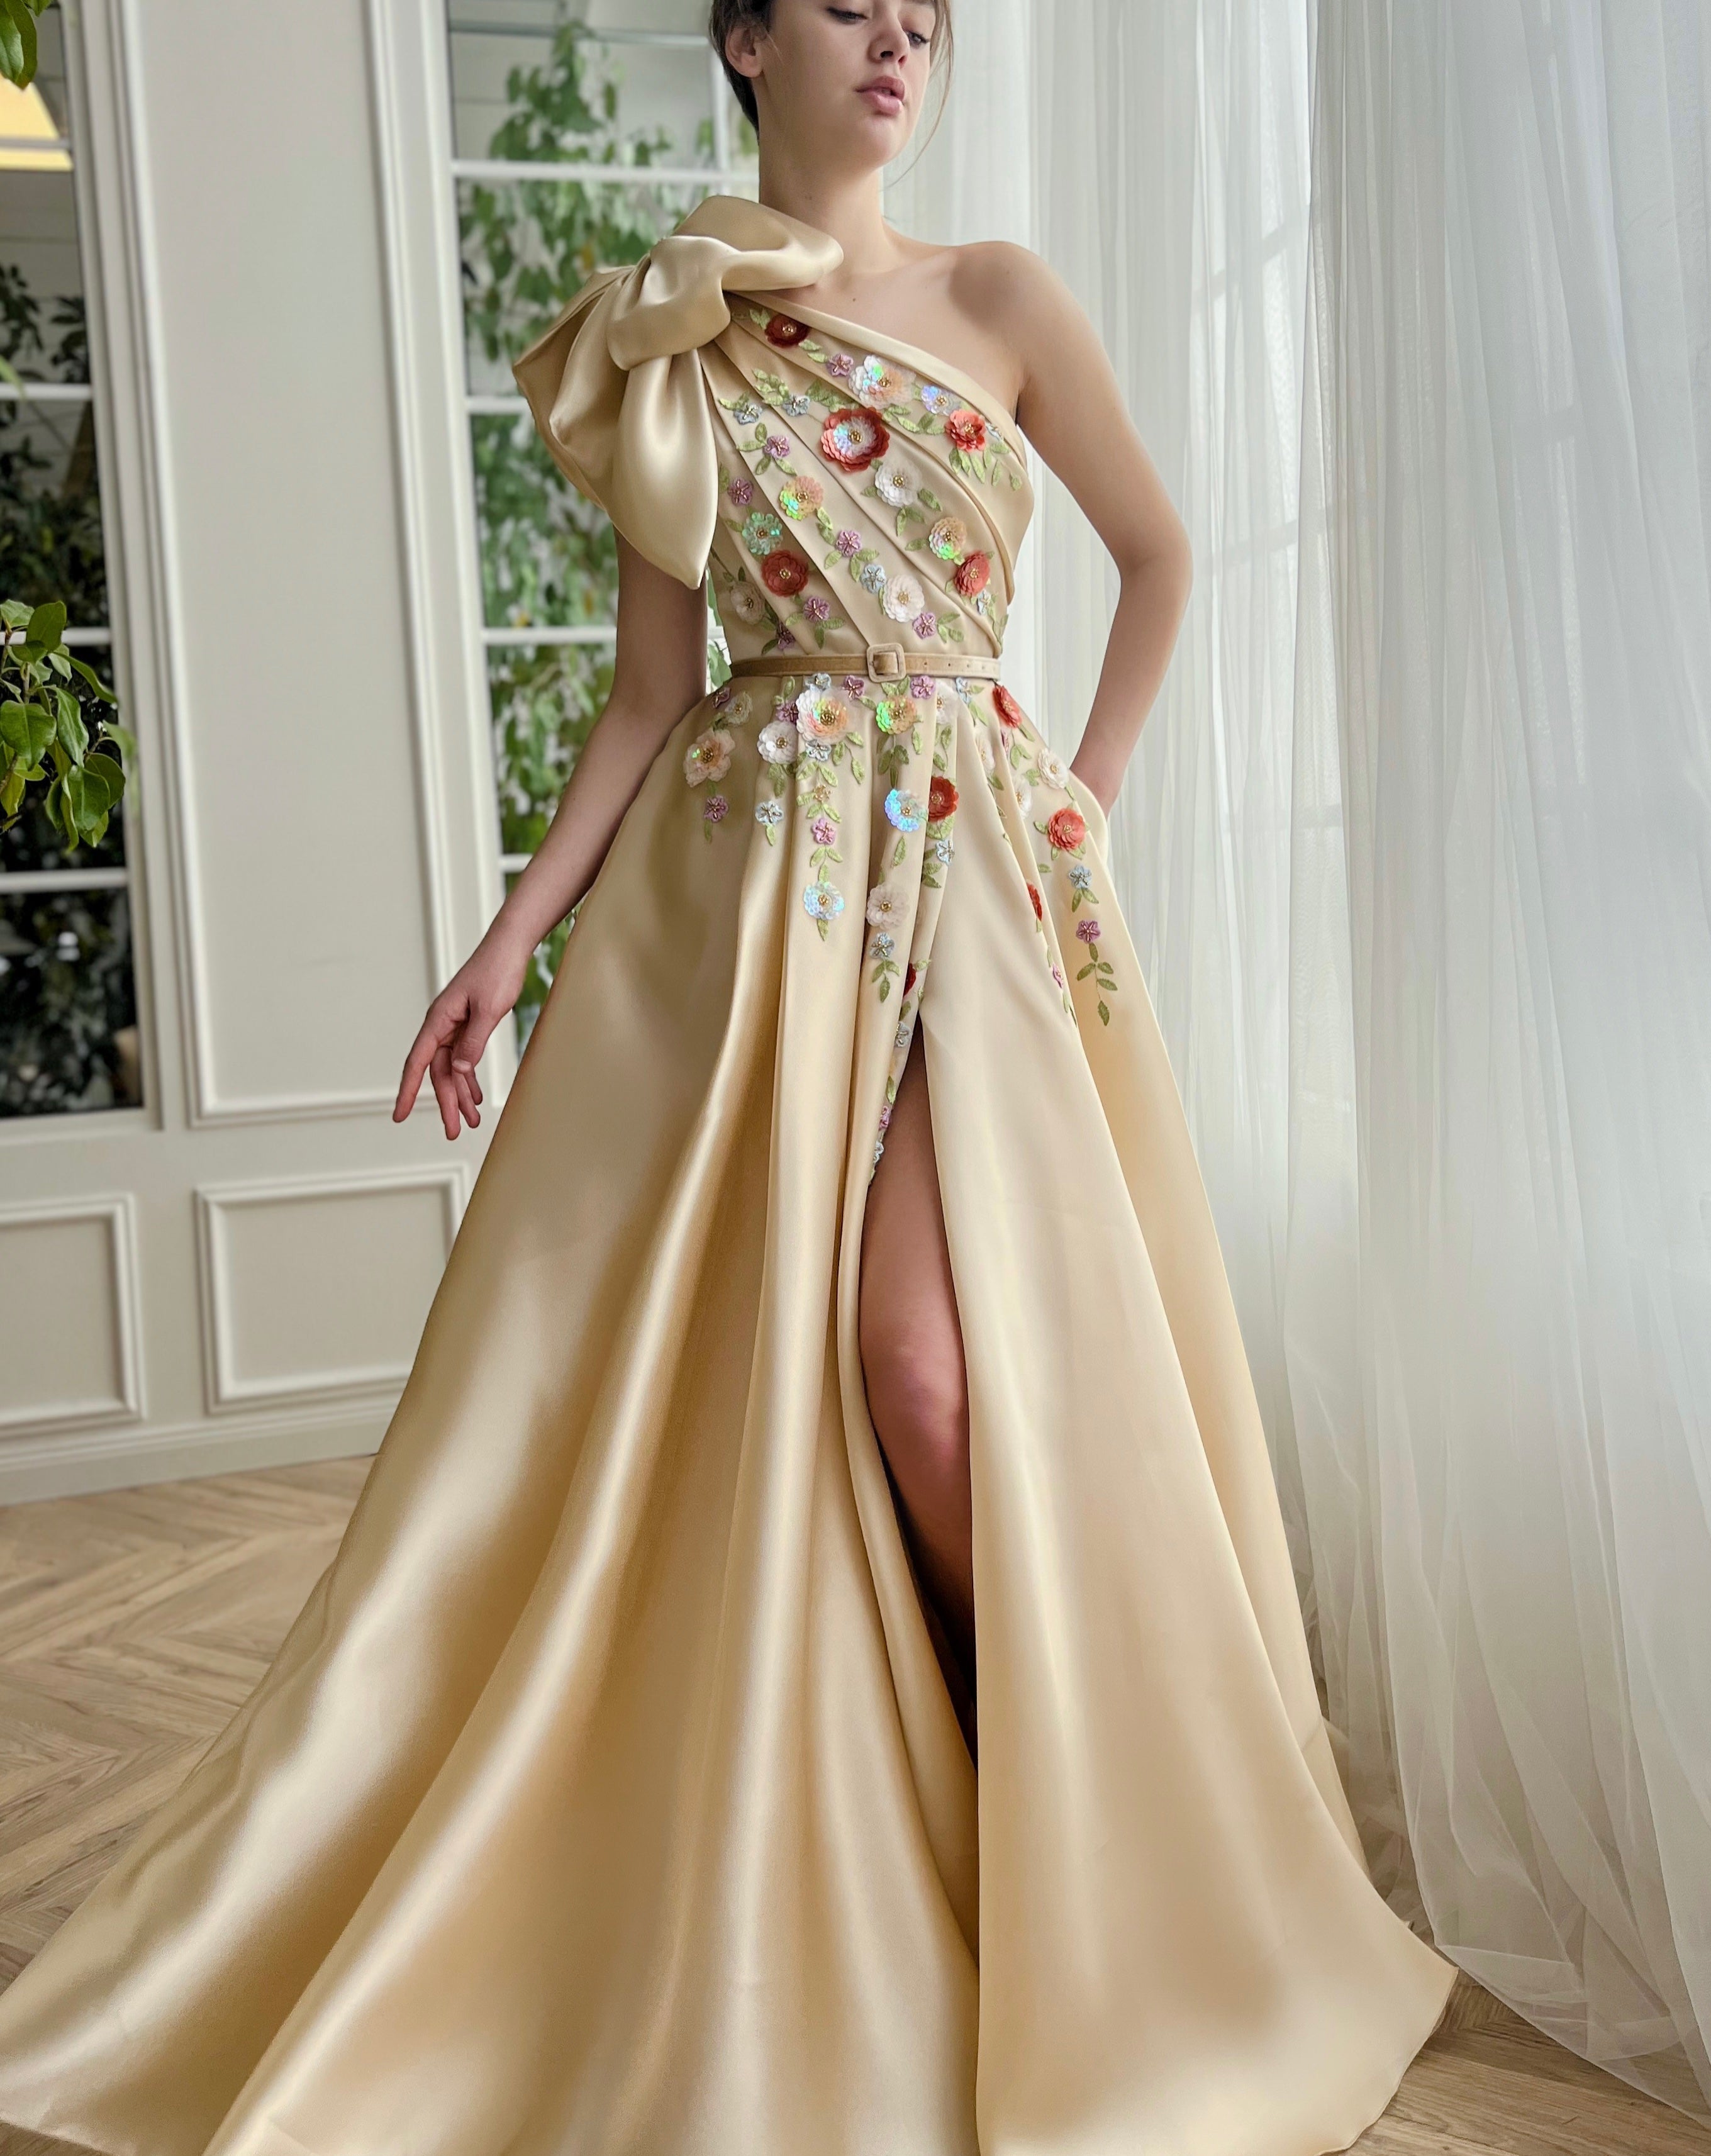 Beige A-Line dress with one shoulder sleeve, belt and embroidery